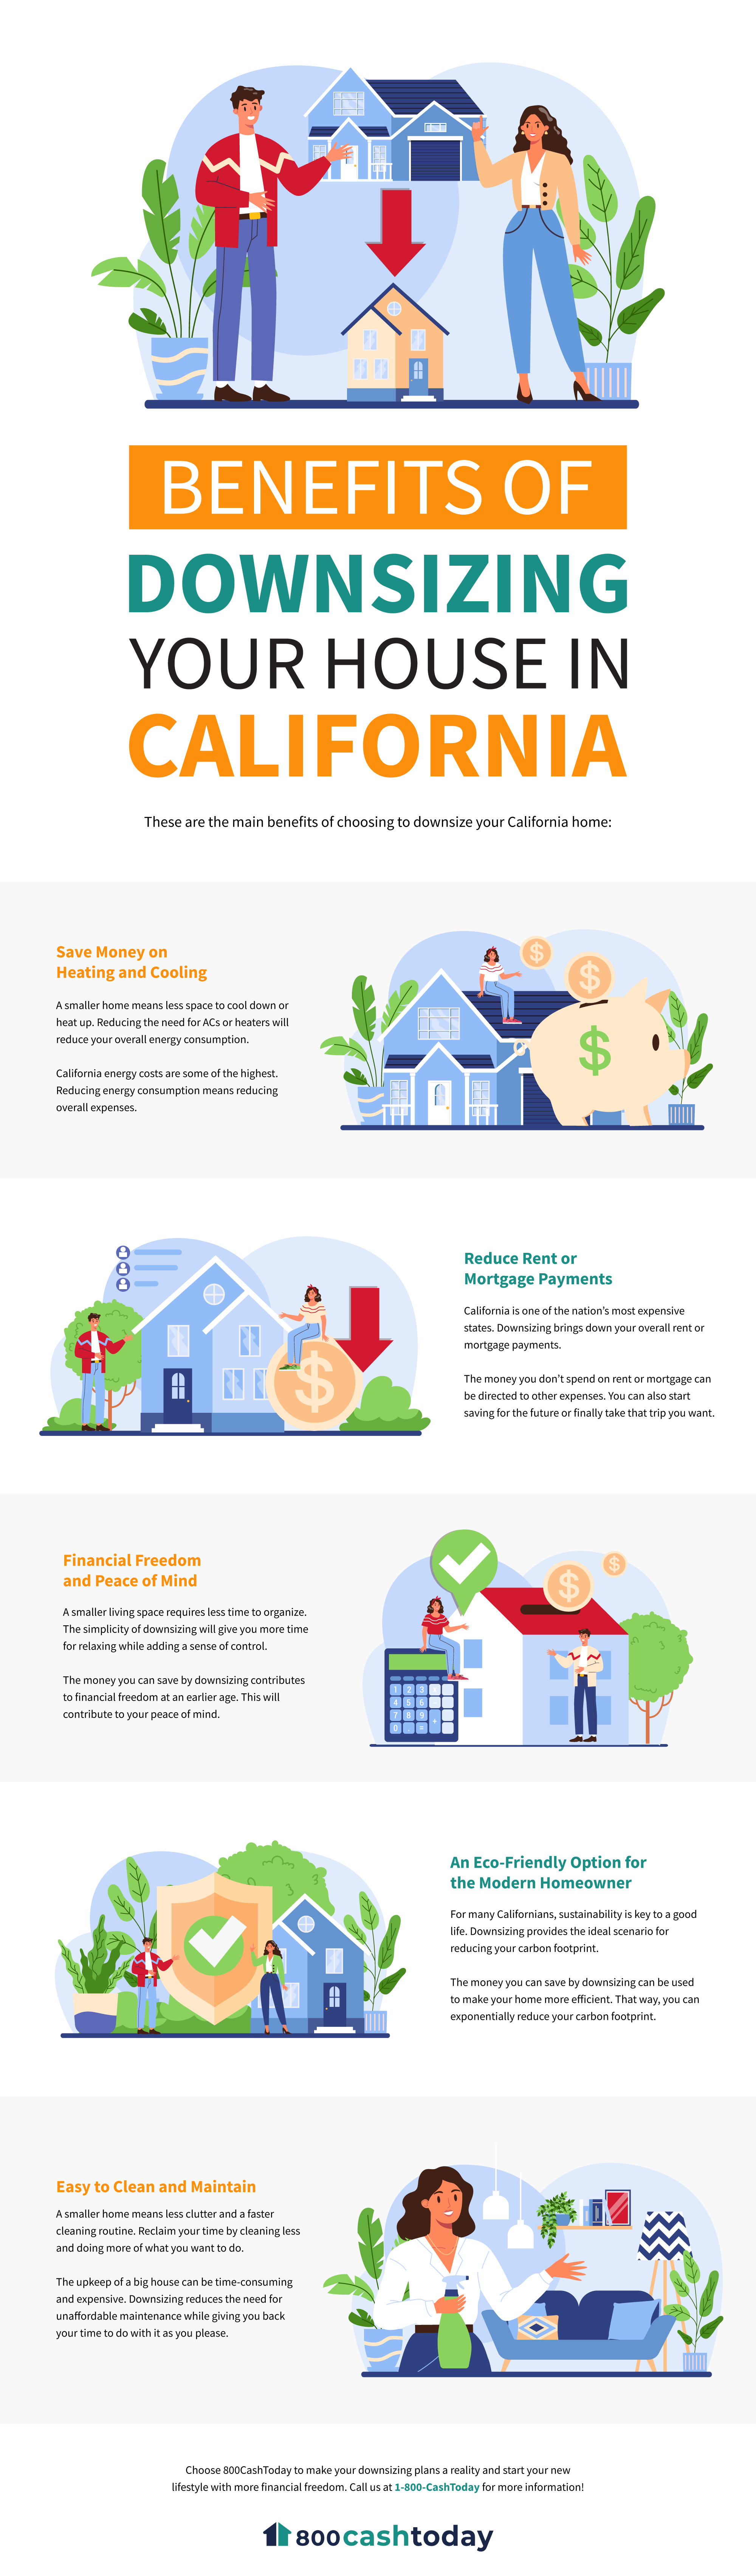 Benefits of Downsizing Your Home in California Infographic